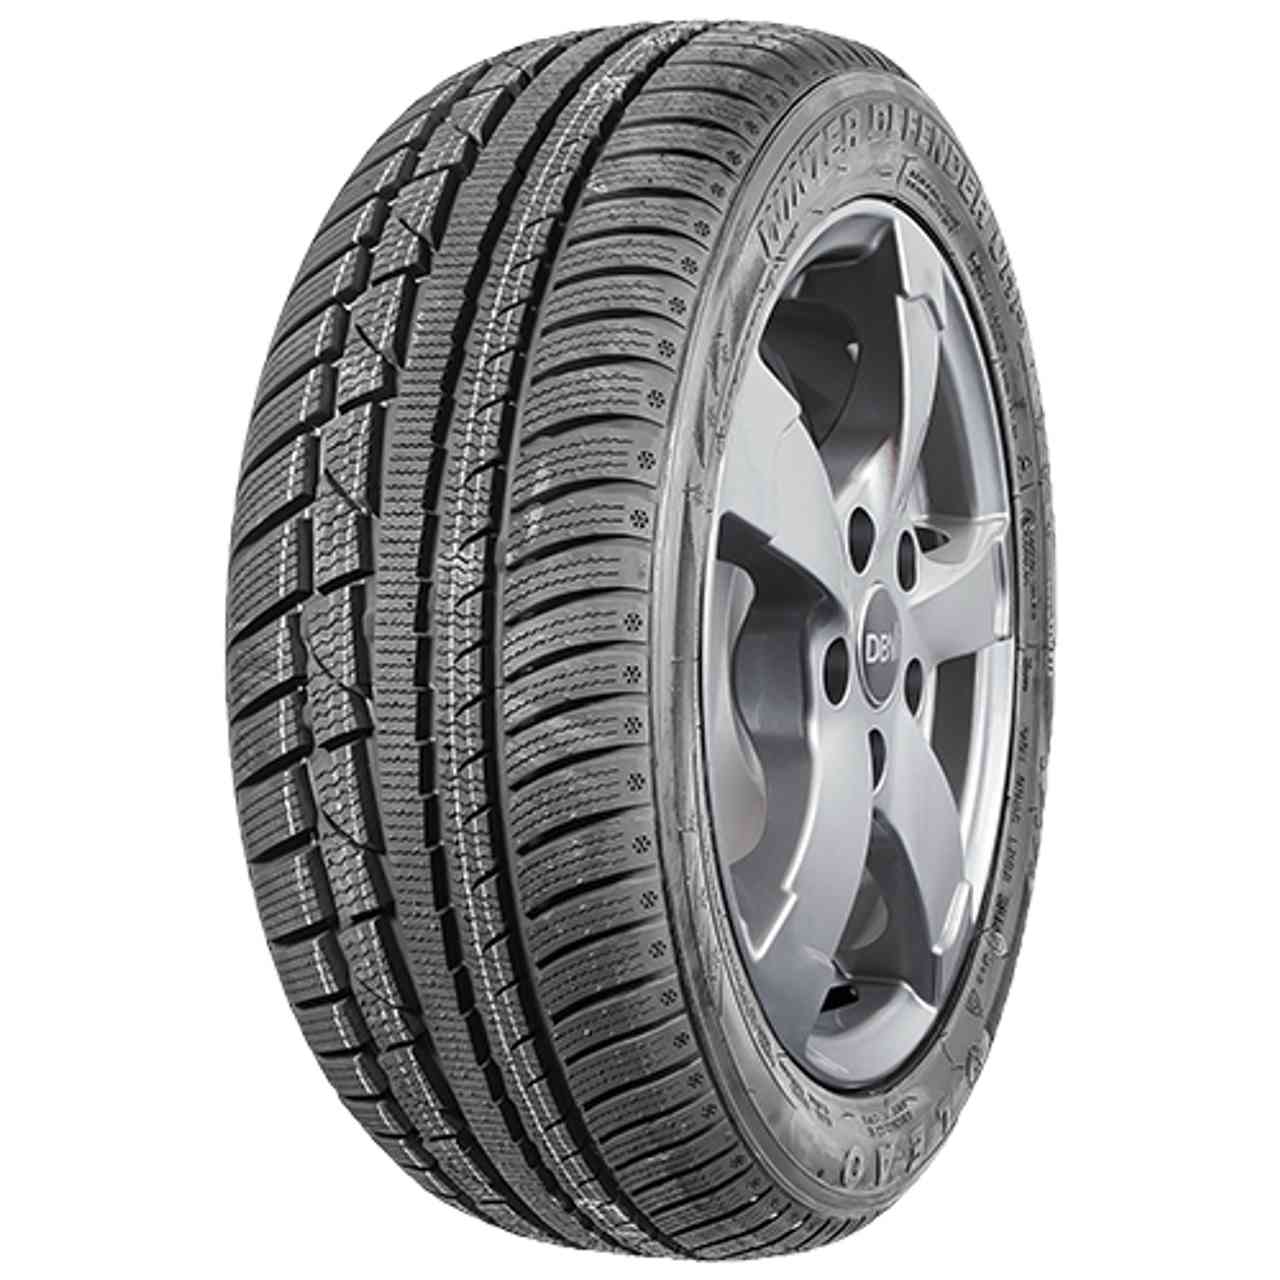 LEAO WINTER DEFENDER UHP 235/55R18 104H BSW XL